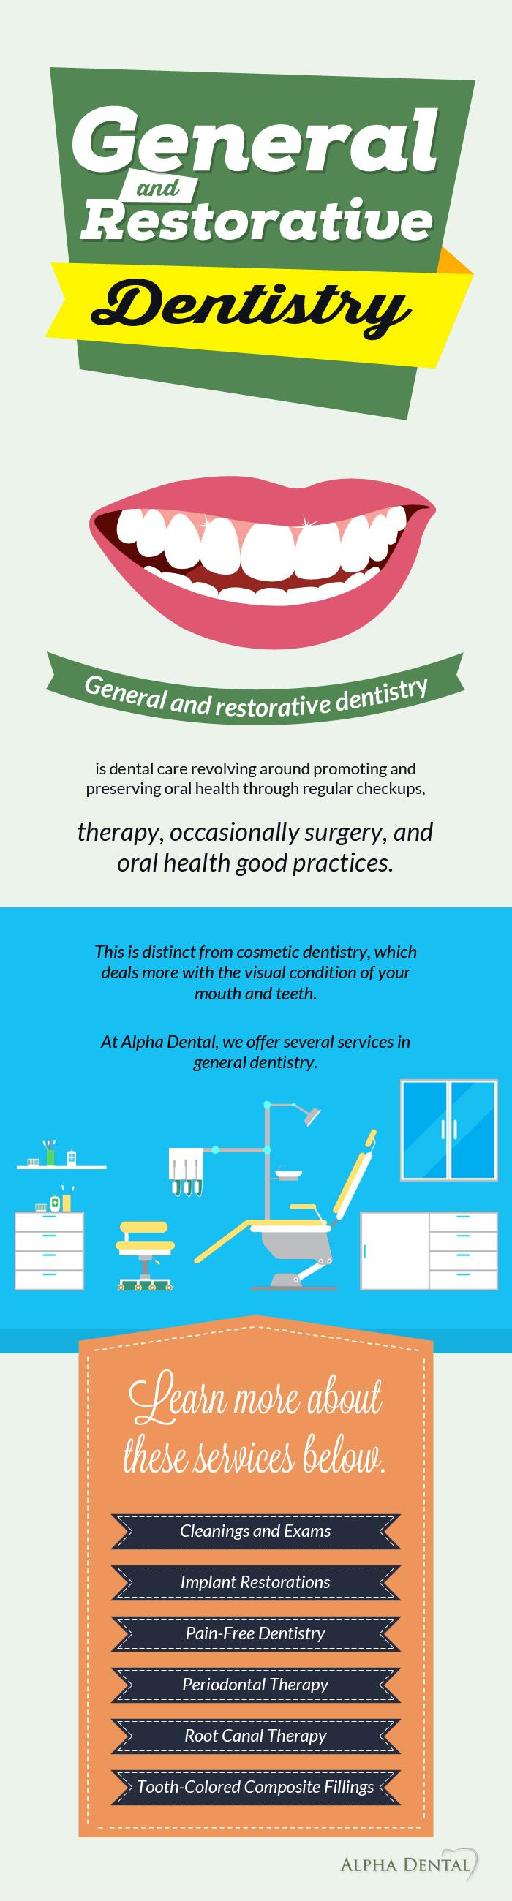 General and Restorative Dentistry Services By Alpha Dental